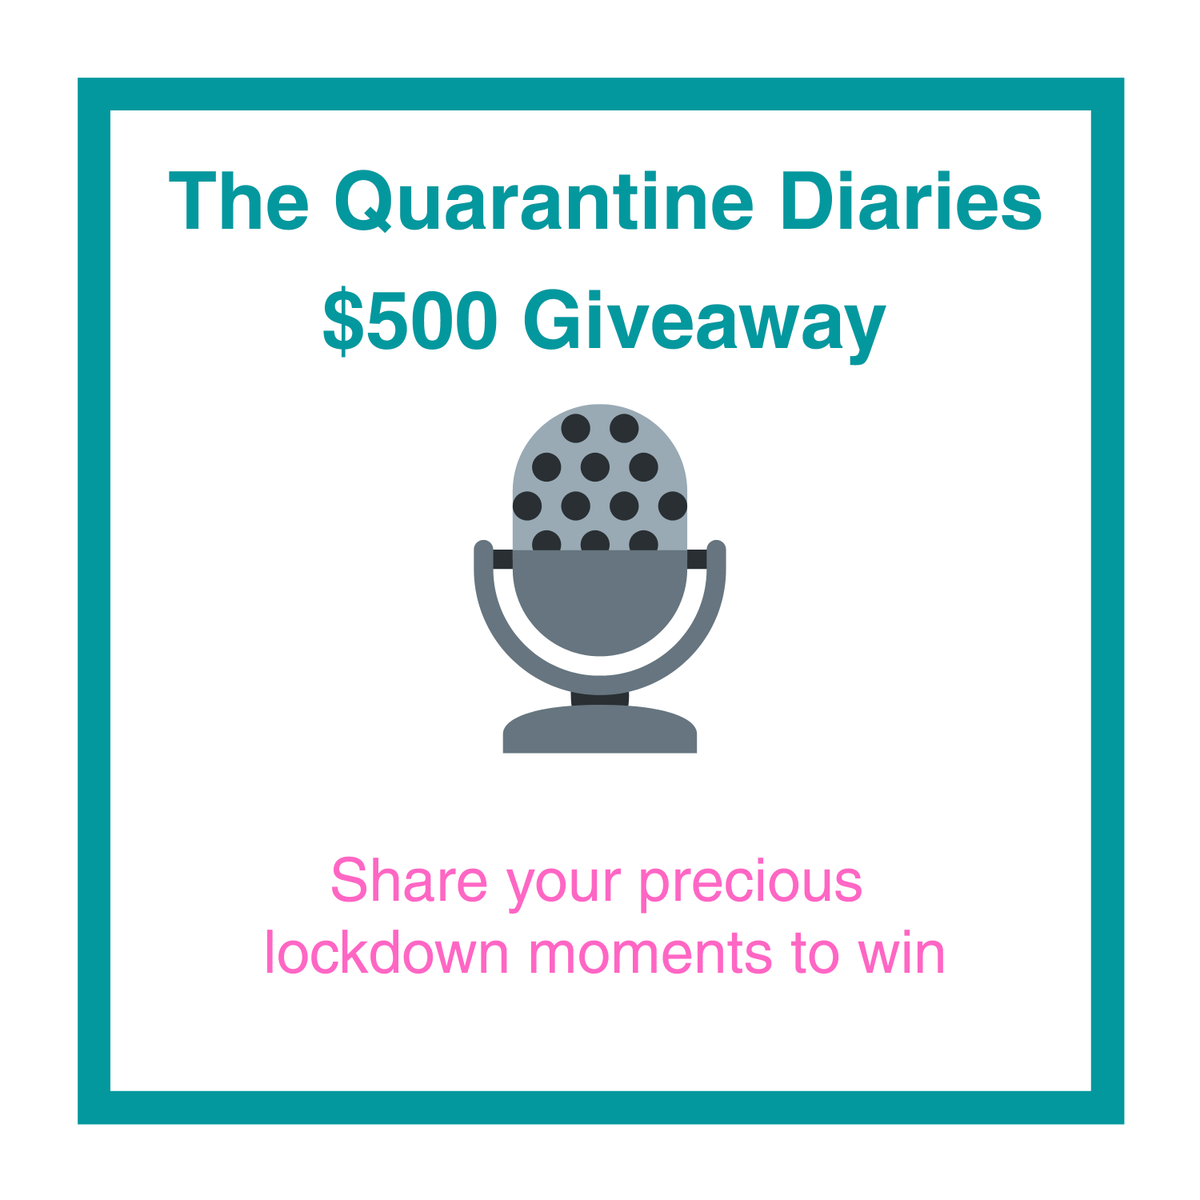 Share your  #QuarantineDiaries for a chance to win. We have $500 in donations for our  #Giveaway. Please follow, retweet, and tag your friends. Winners picked at 4/11 at 8PM. Good luck!Sponsors: @HobockRyan @julia6118 @xD4rkS0u1x @VonWolf9 @LegalBeagle1215 @BC_265 @TrishasTweet